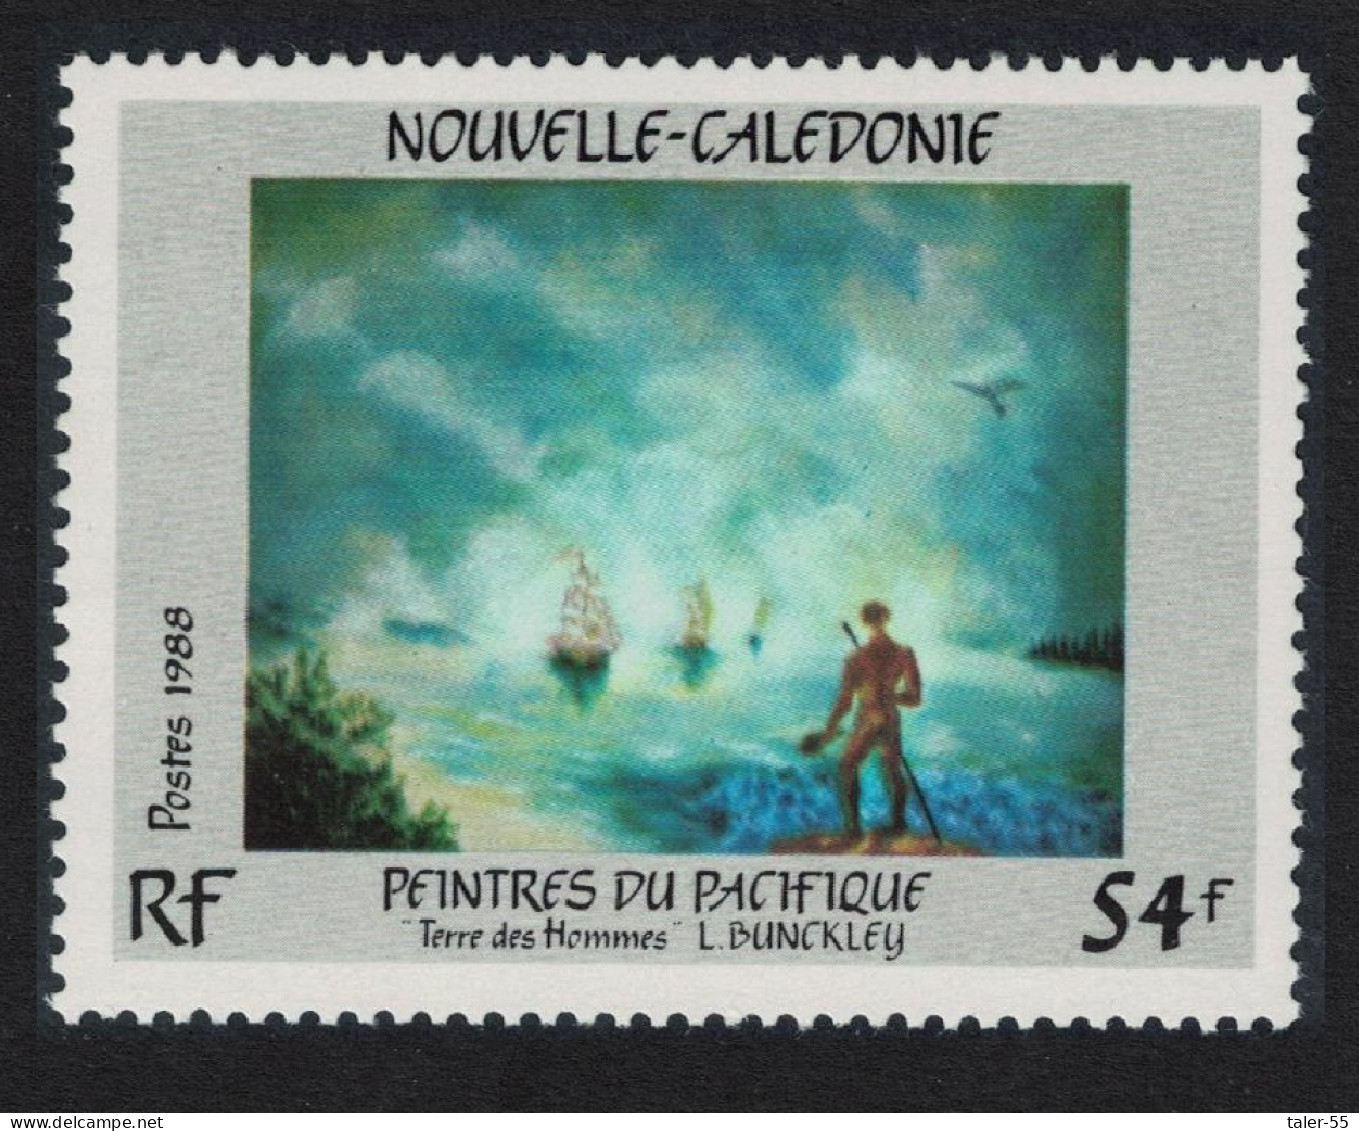 New Caledonia 'Terre Des Hommes' Painting By L. Bunckley 1988 MNH SG#852 - Unused Stamps